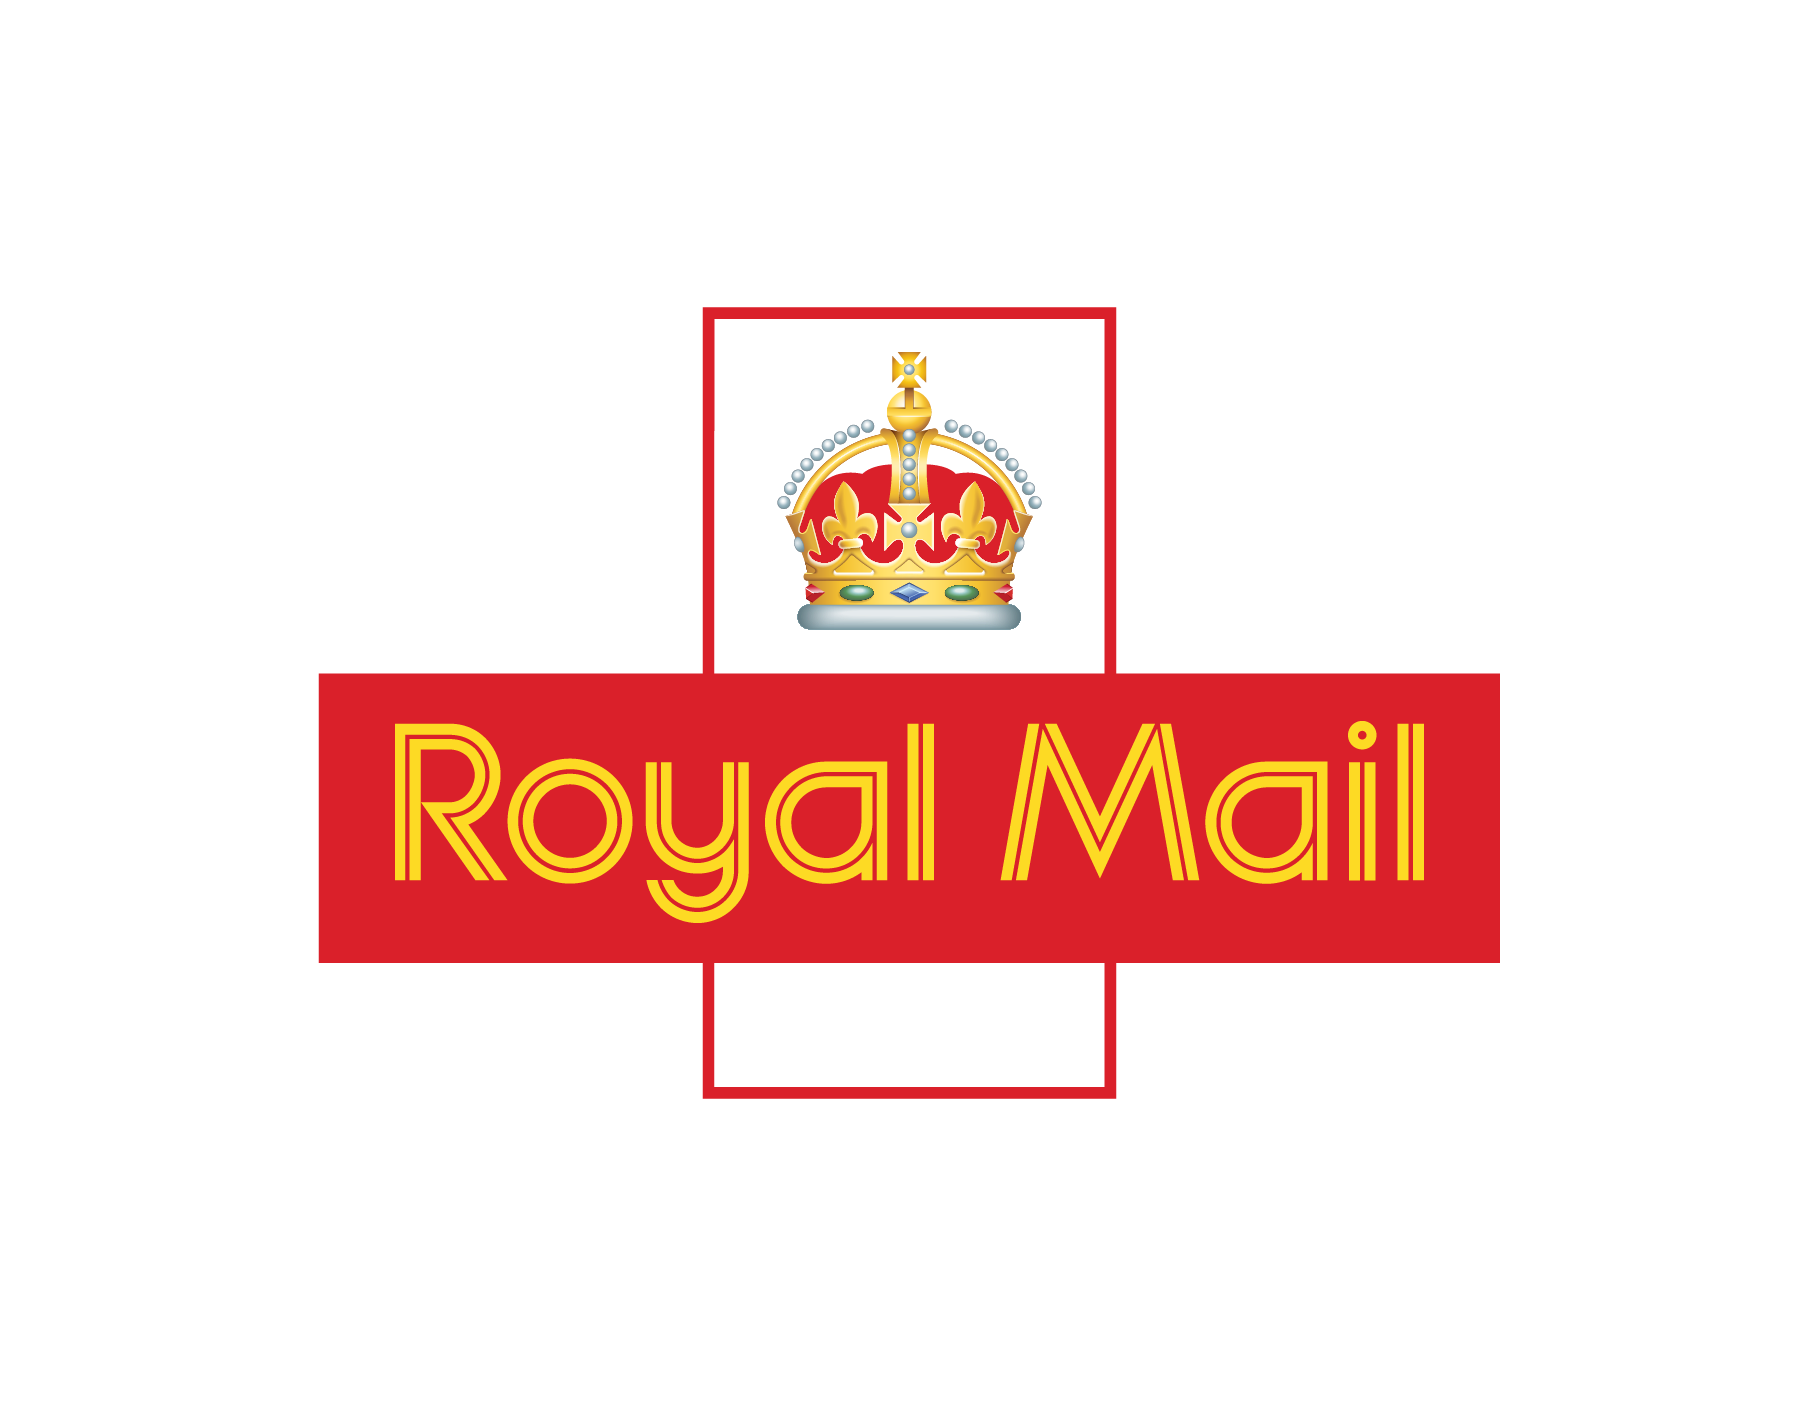 The new Royal Mail logo with a cross-shape and crown above the Royal Mail wording